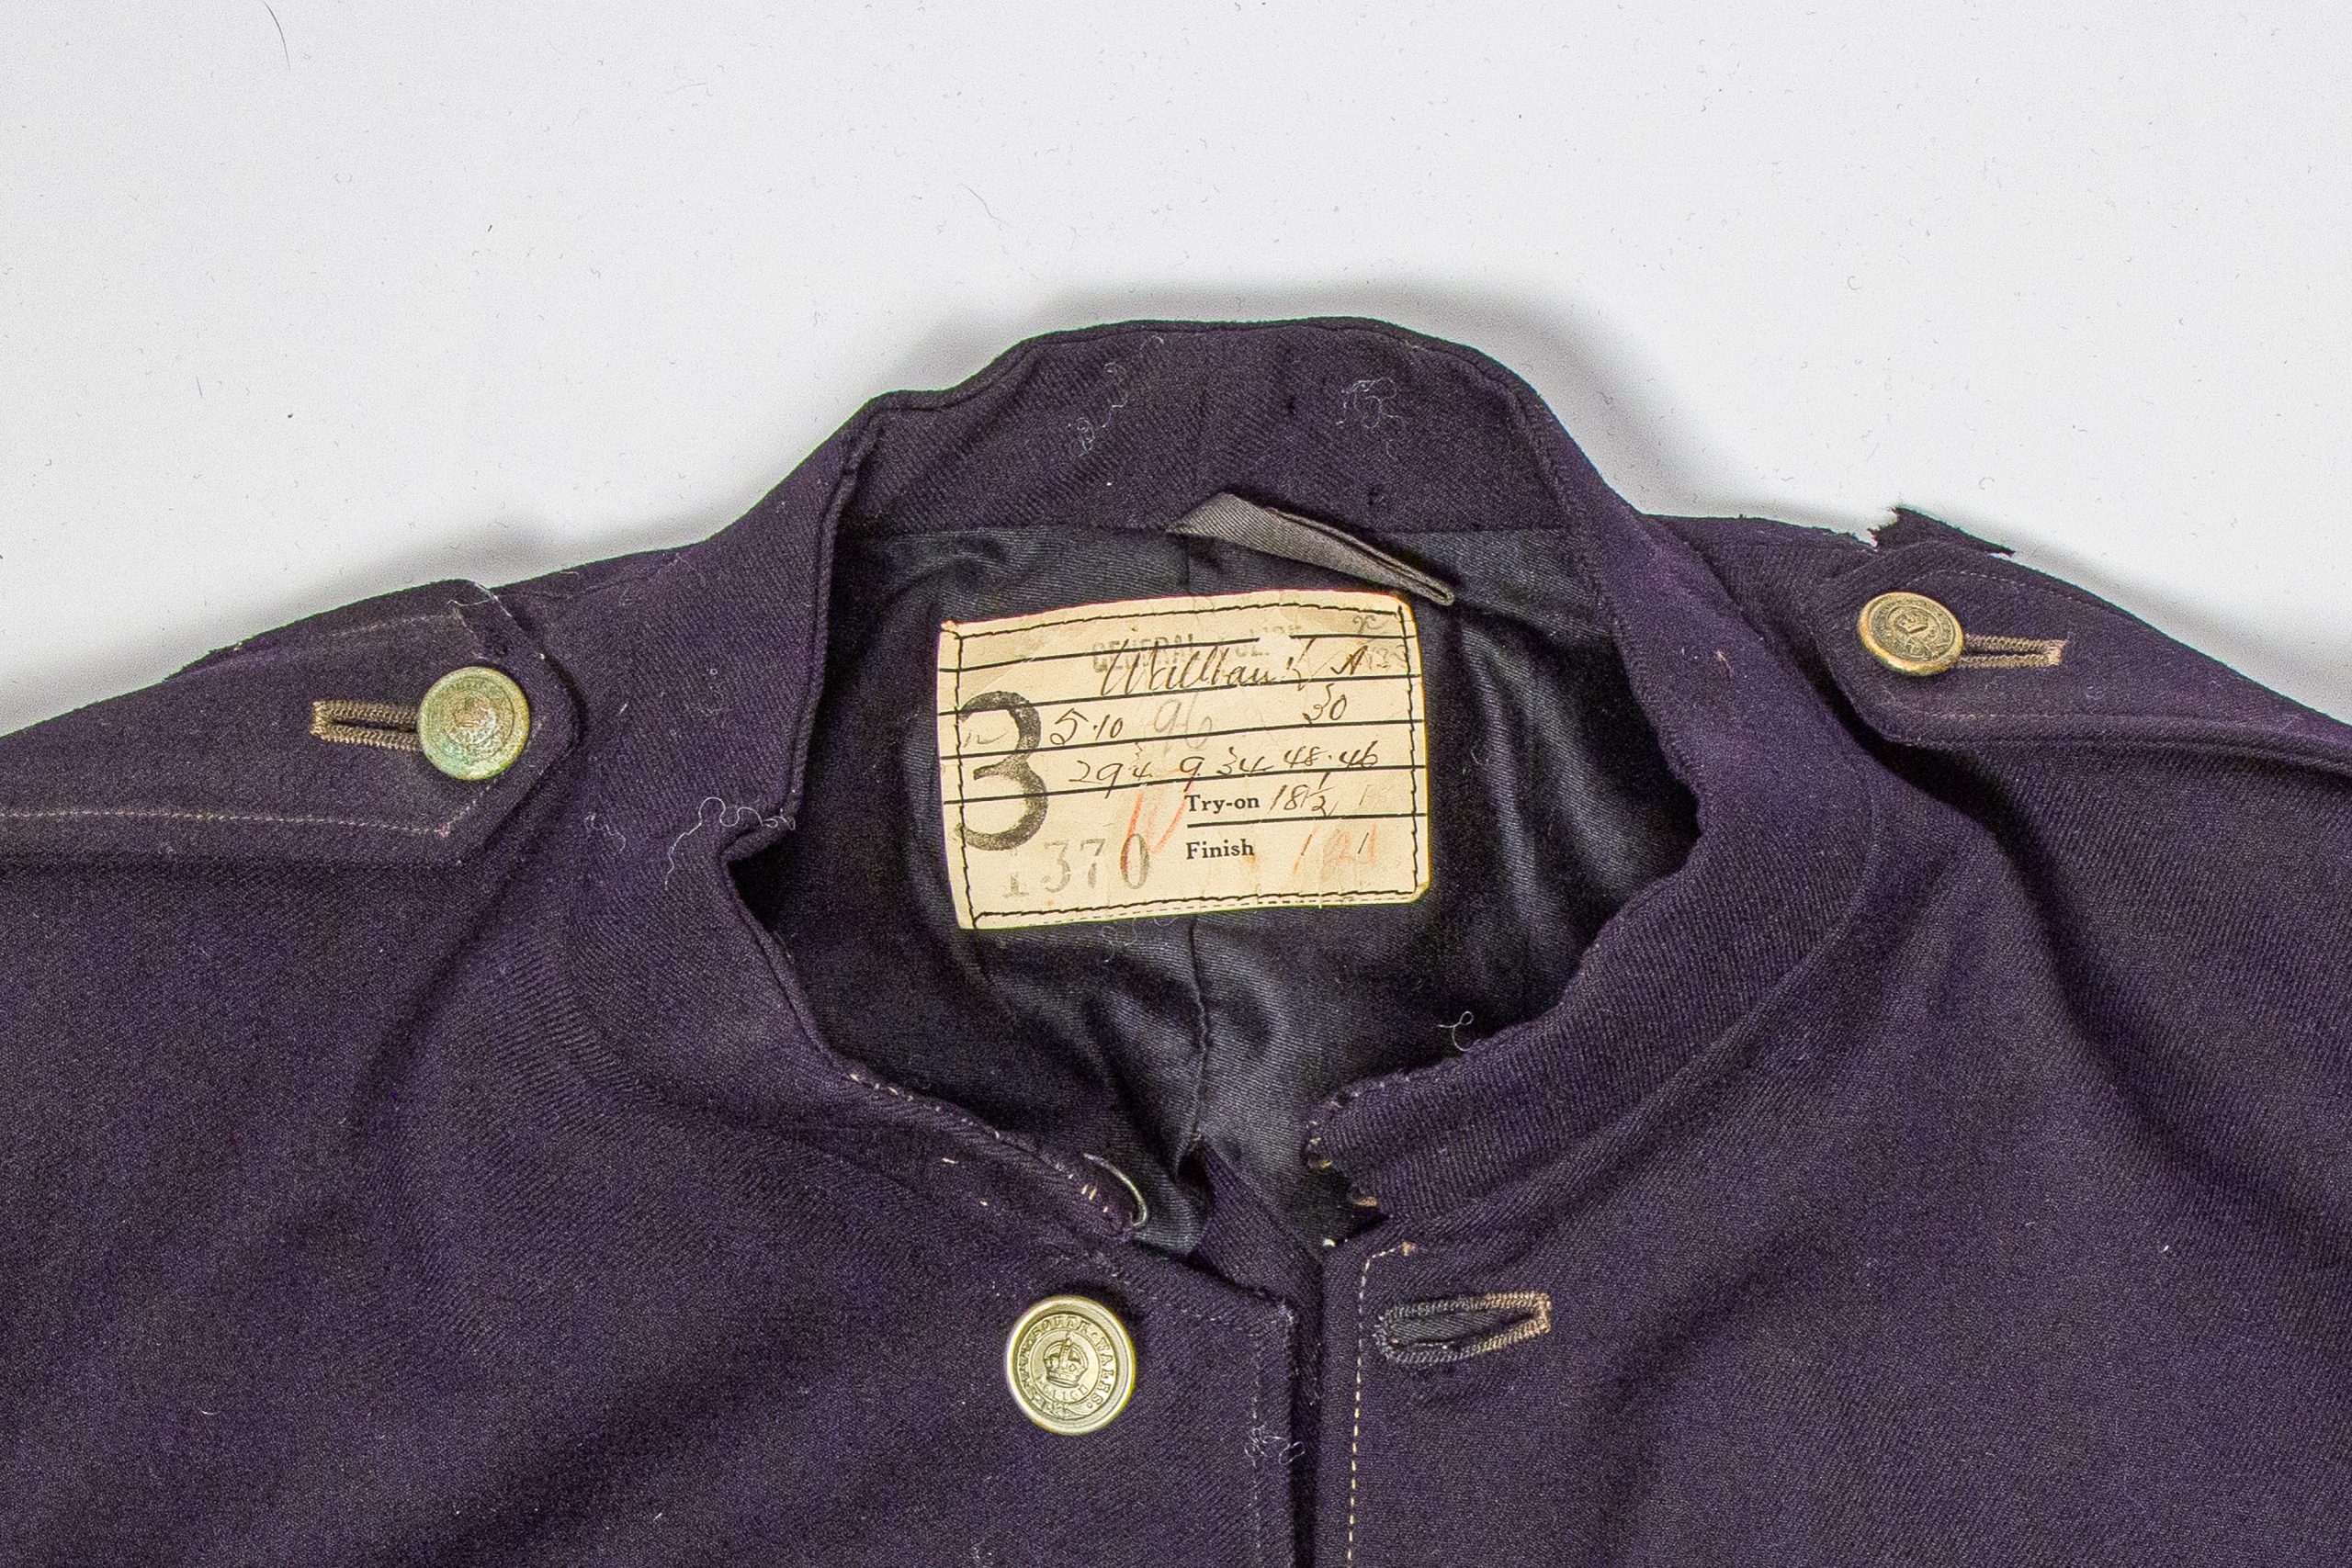 Close-up shot of the collar and tag of a police jacket